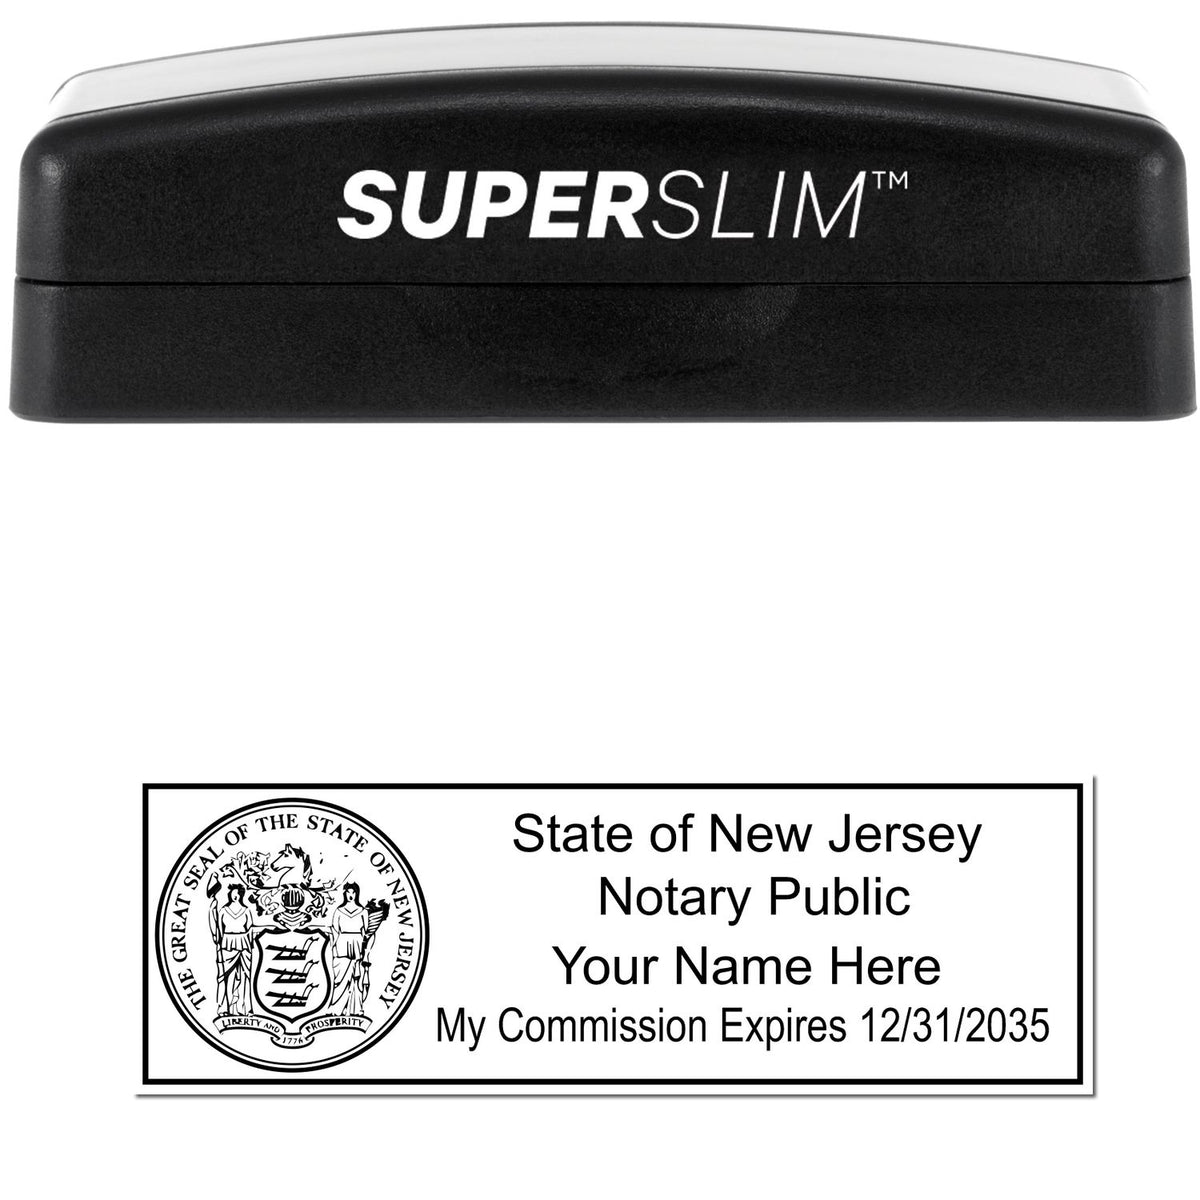 The main image for the Super Slim New Jersey Notary Public Stamp depicting a sample of the imprint and electronic files